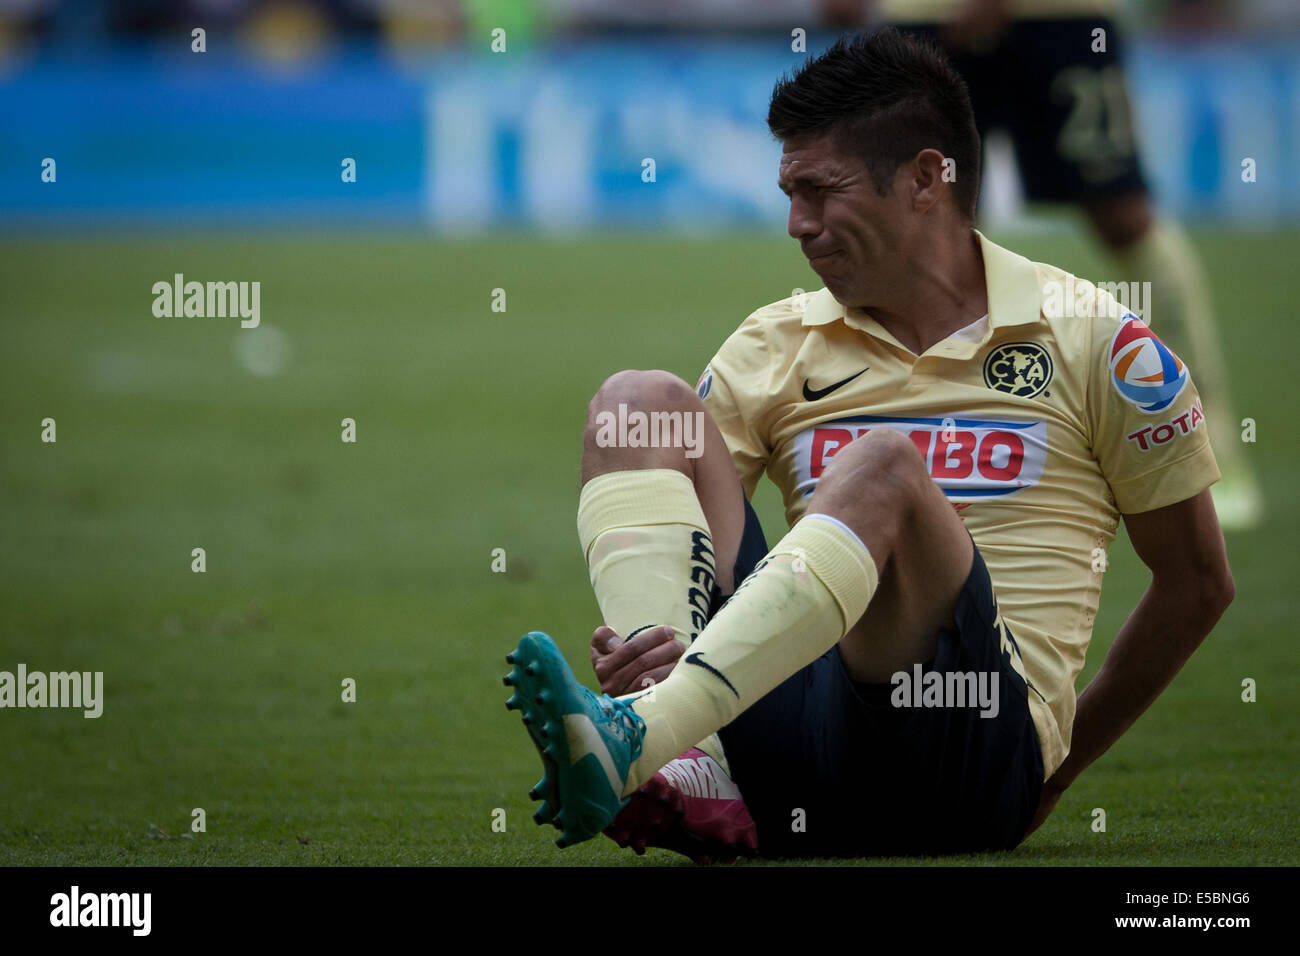 Mexico City, Mexico. 26th July, 2014. America's Oribe Peralta reacts during the match of the MX League Opening Tournament against Xolos, held at Azteca Stadium in Mexico City, capital of Mexico, on July 26, 2014. © Pedro Mera/Xinhua/Alamy Live News Stock Photo